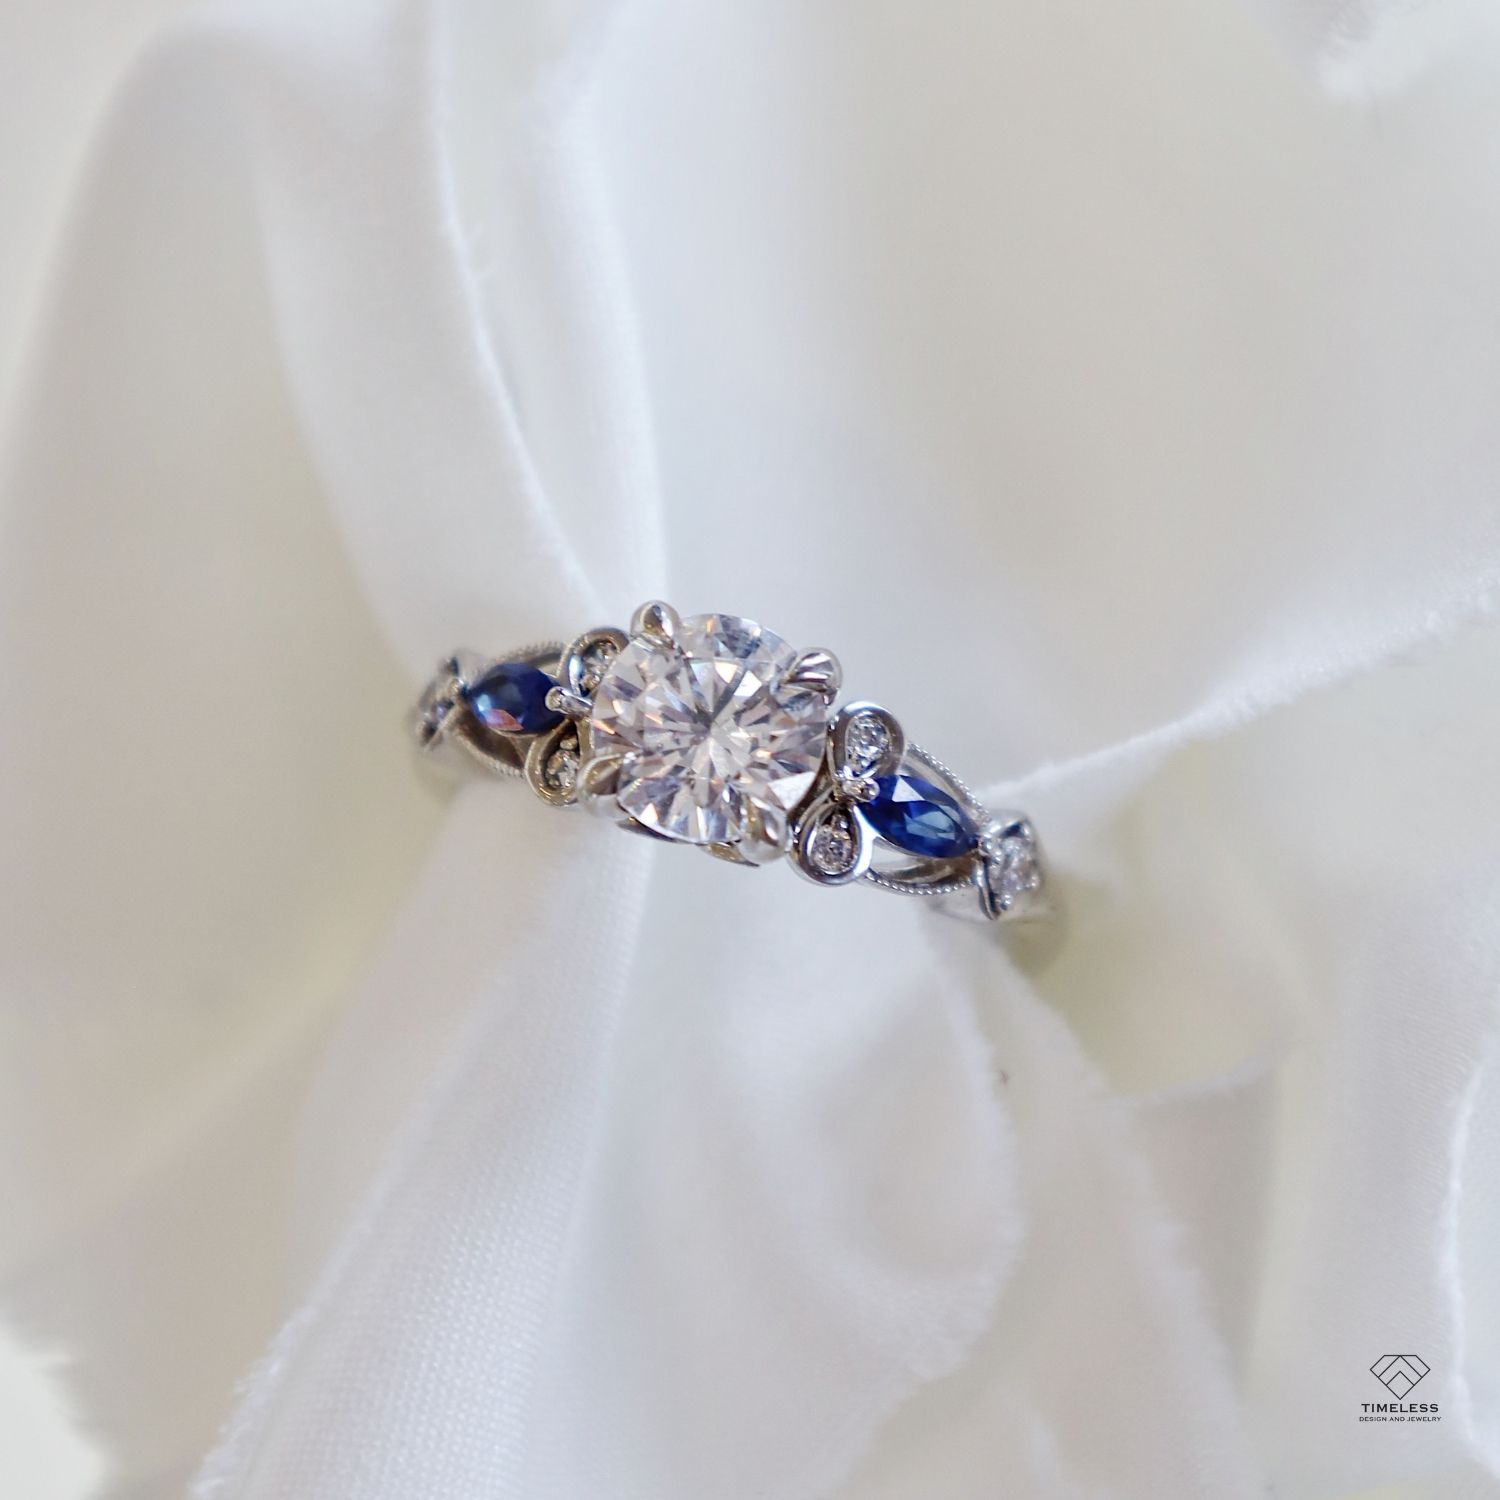 Custom Diamond Engagement Ring with Blue Sapphires in Salt Lake City by Timeless Design and Jewelry